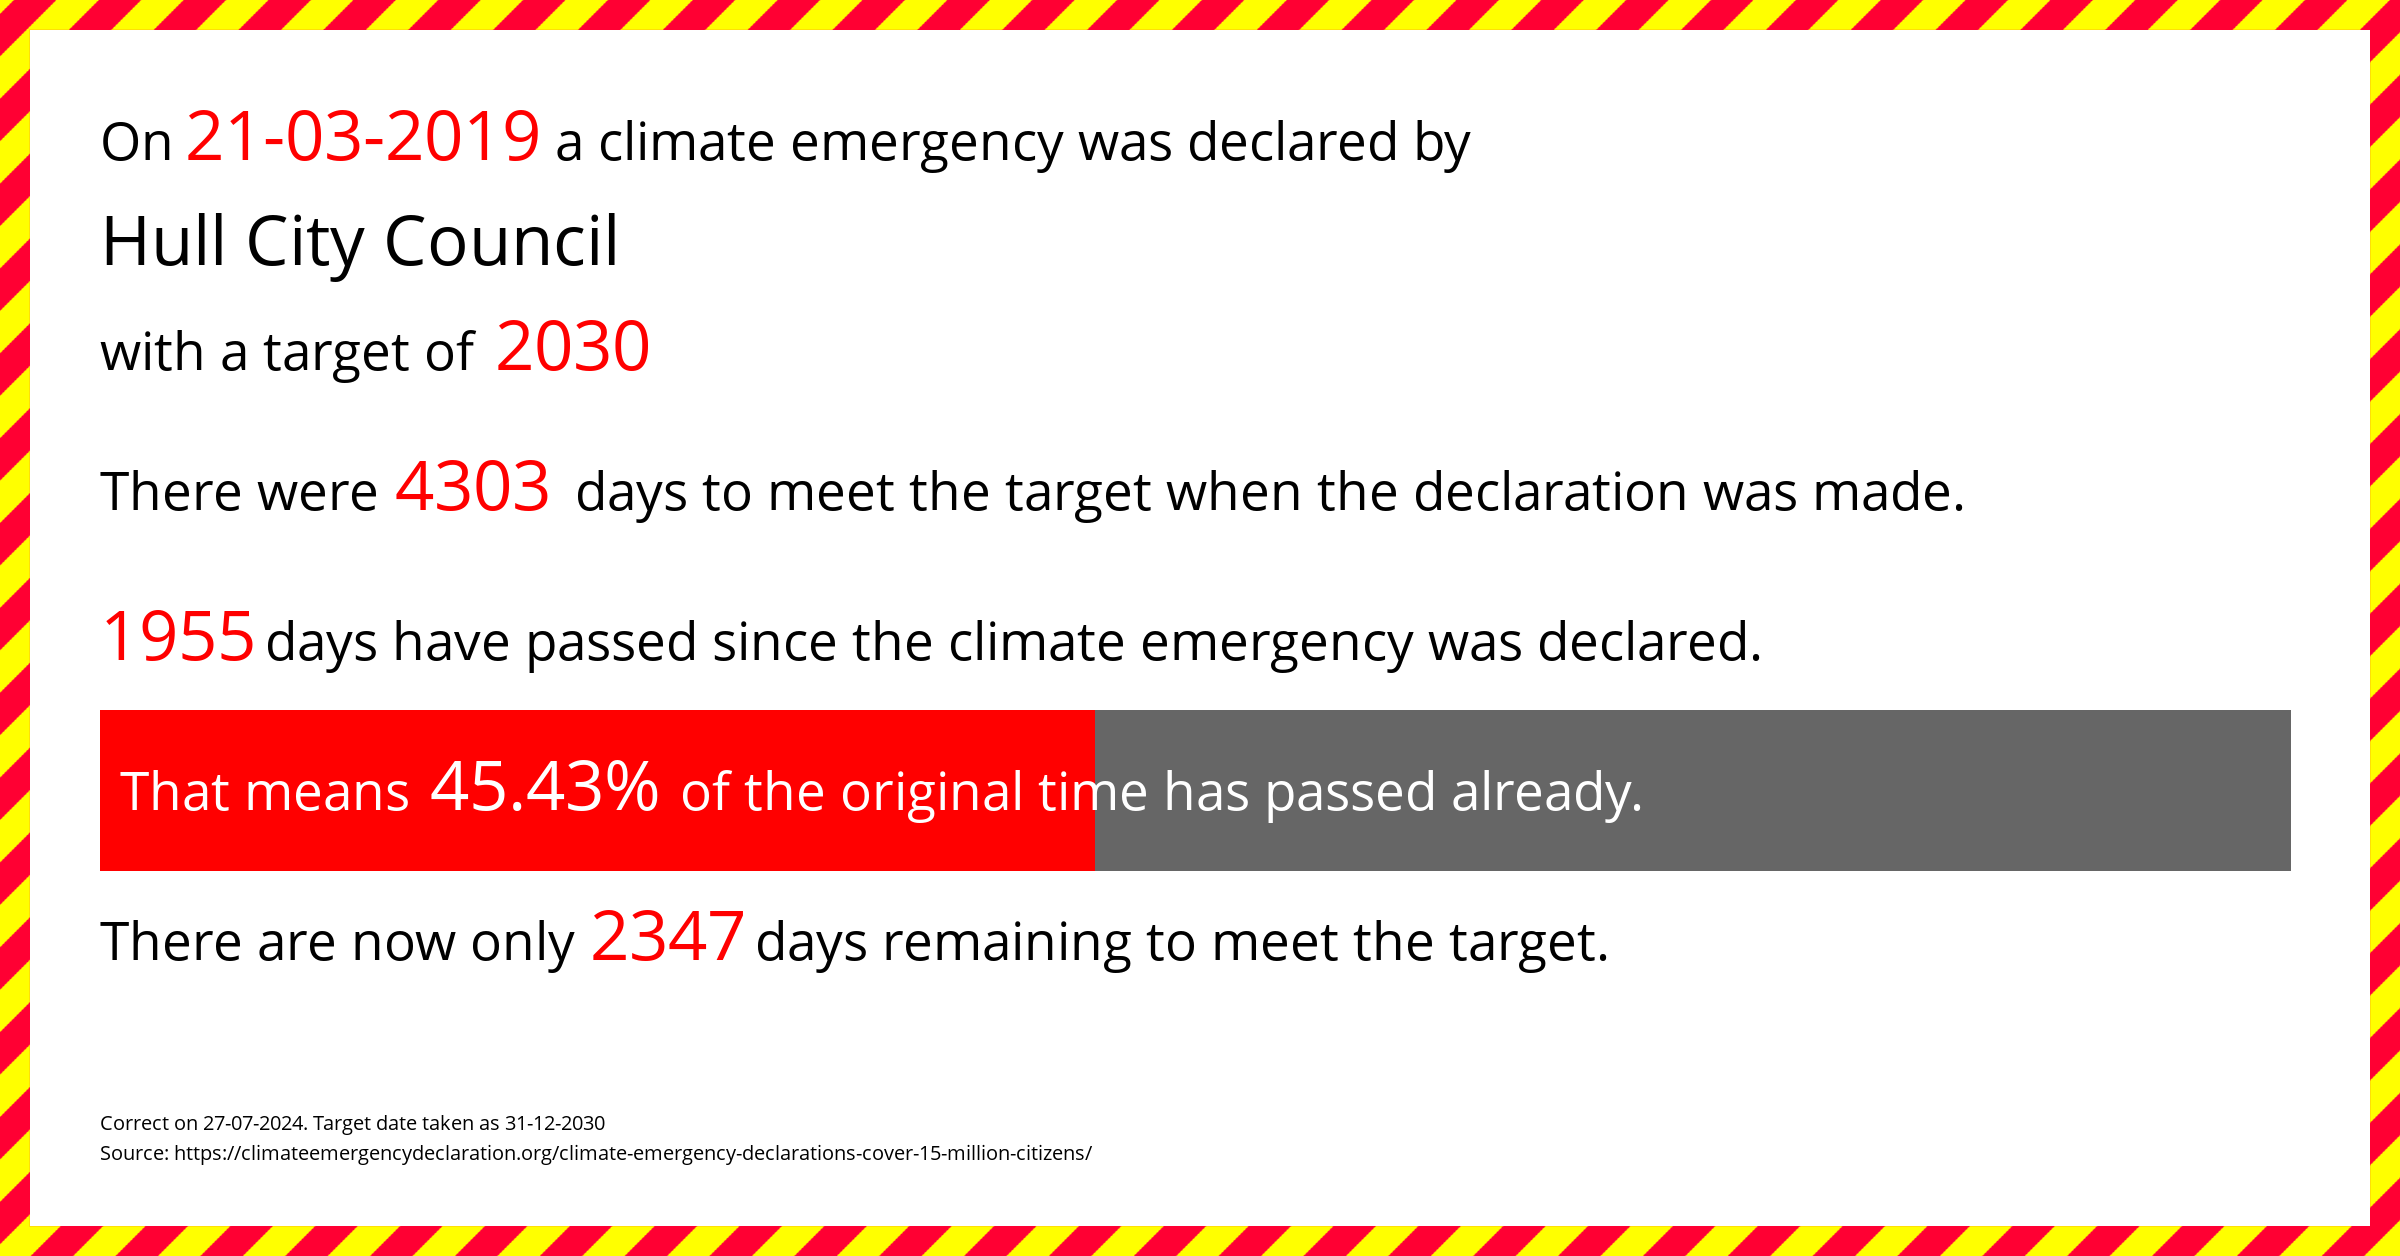 Hull City Council declared a Climate emergency on Thursday 21st March 2019, with a target of 2030.